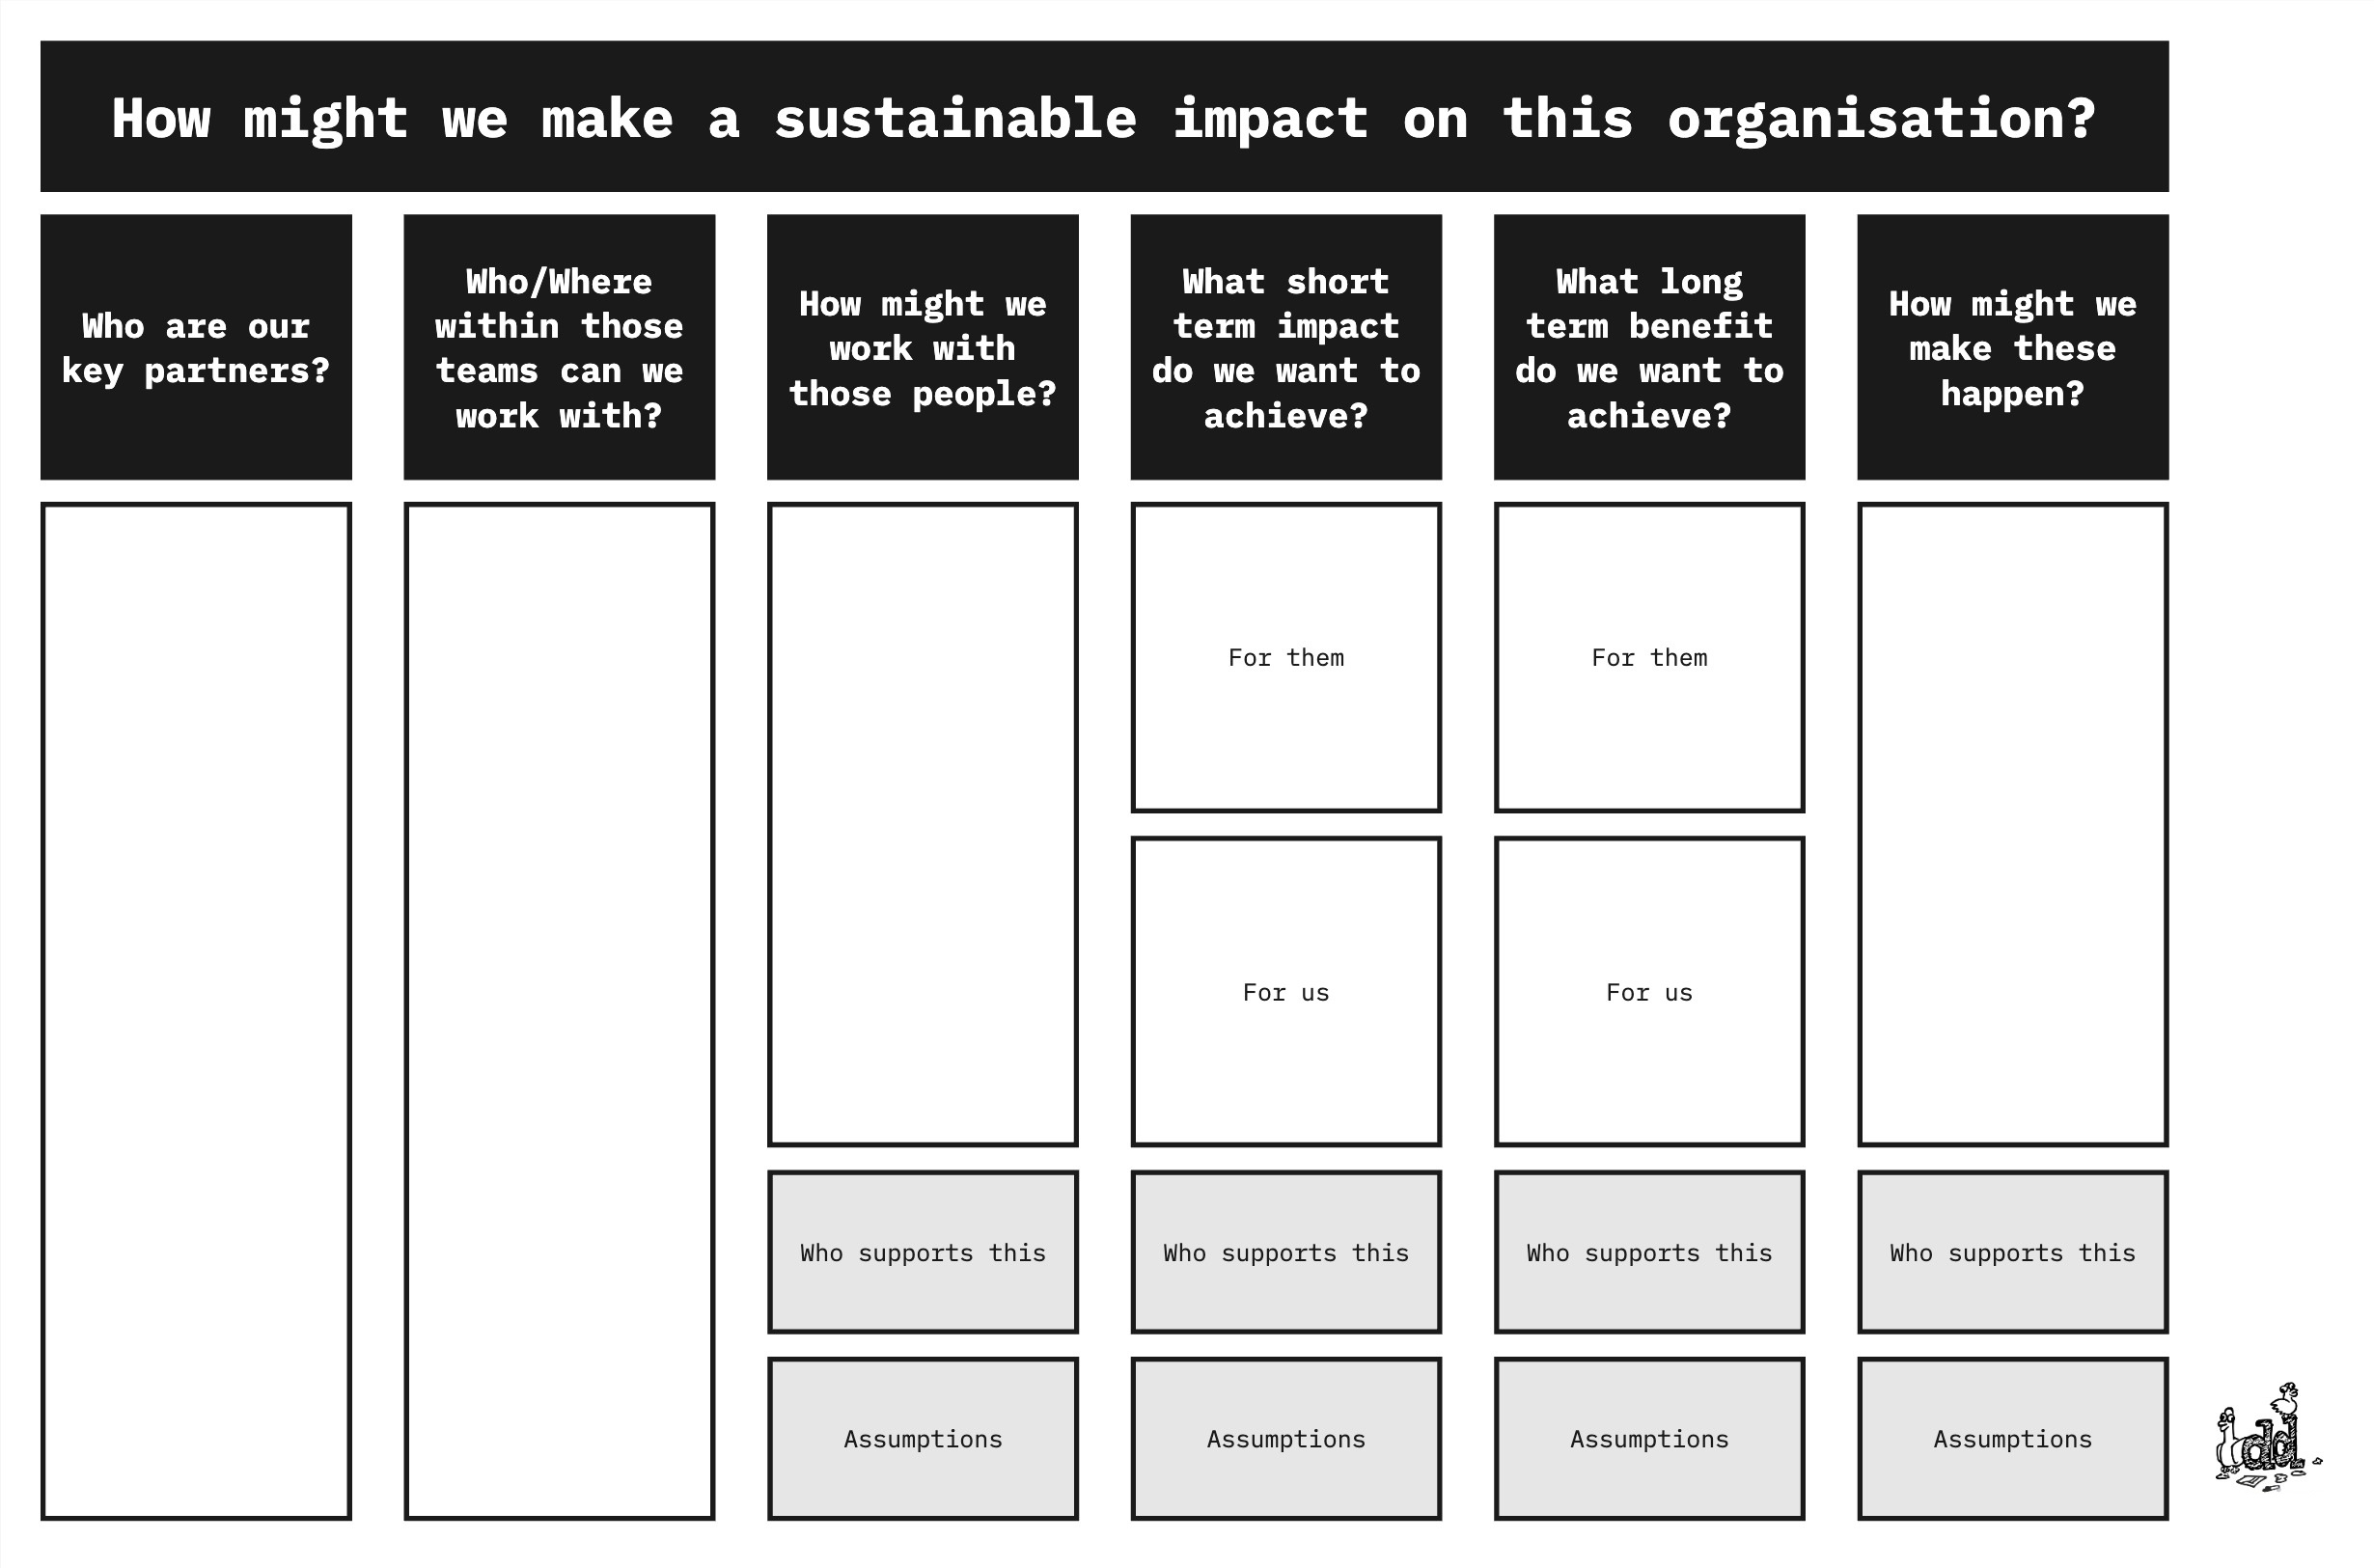 Change framework for making an impact. Asks several questions to navigate a user to understanding how they might make an impact. Starts with who are the key partners. Who within those teams you can reach. How you'll reach them. What benefits short and long term we and they can get by working together. And then what we could do. Underneath the last 3 section is space for assumptions and who will do the work - By Andrew Duckworth